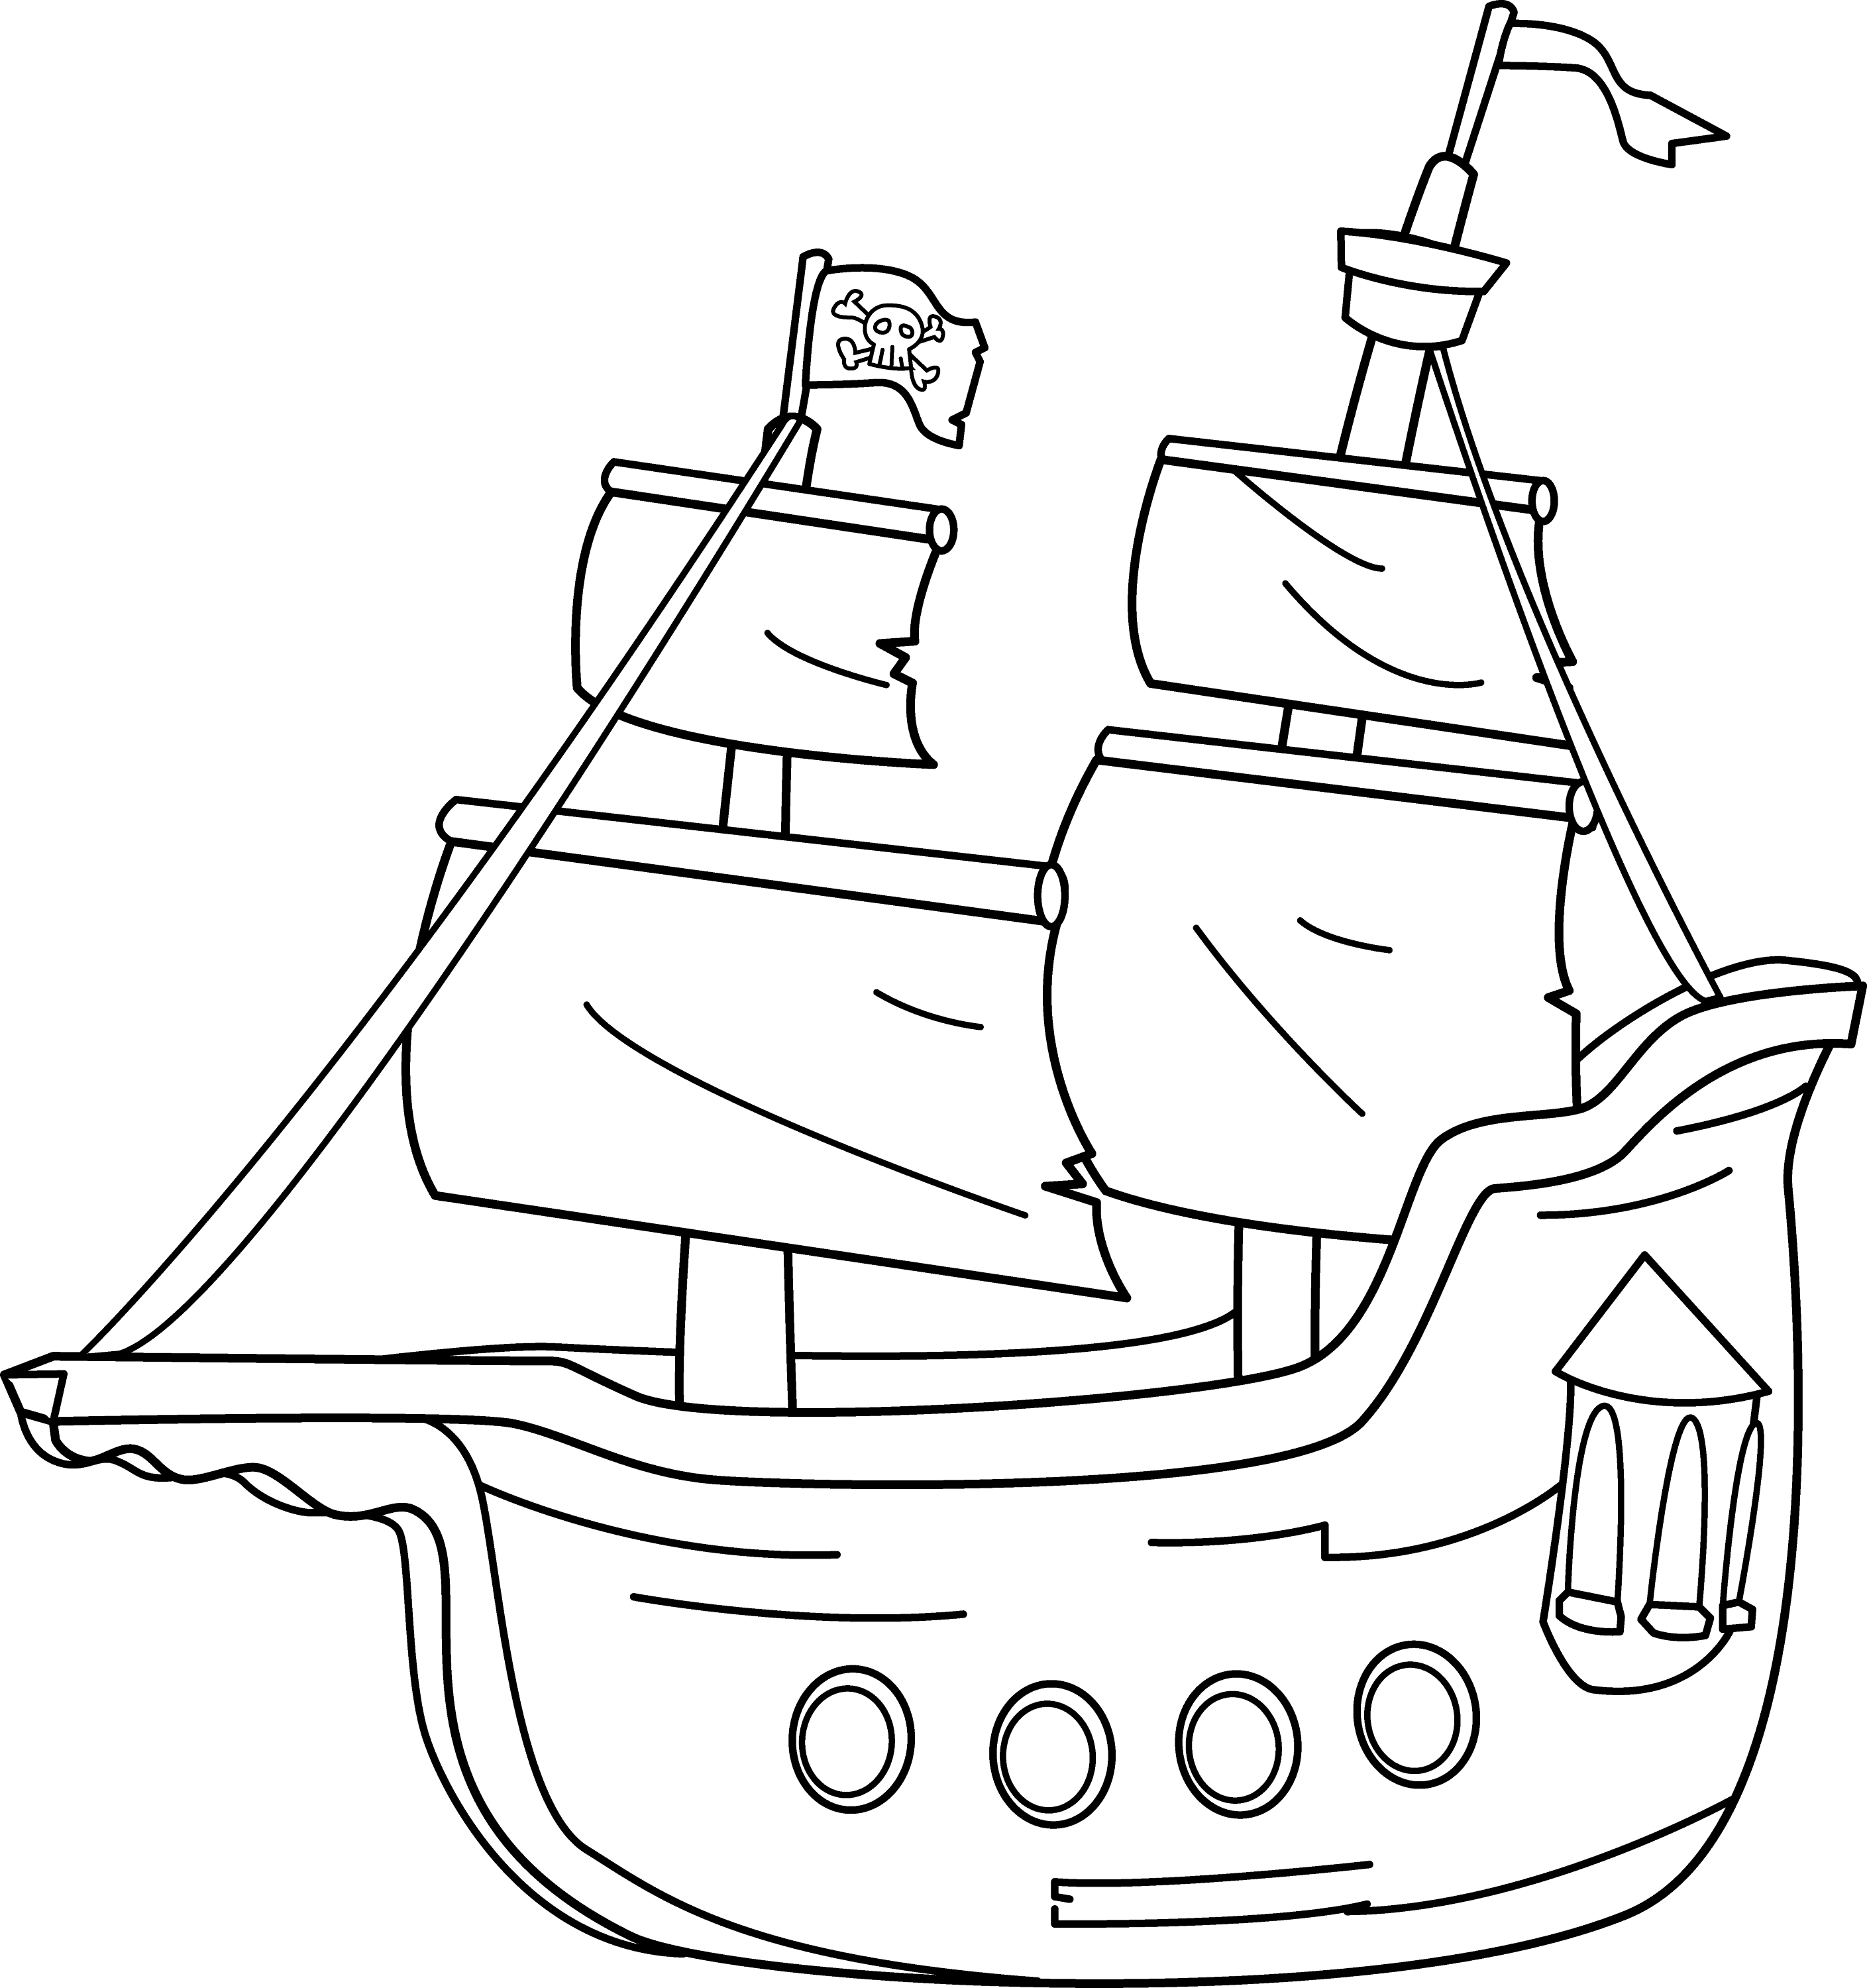 Pirate Ship Coloring Page Free Clip Art